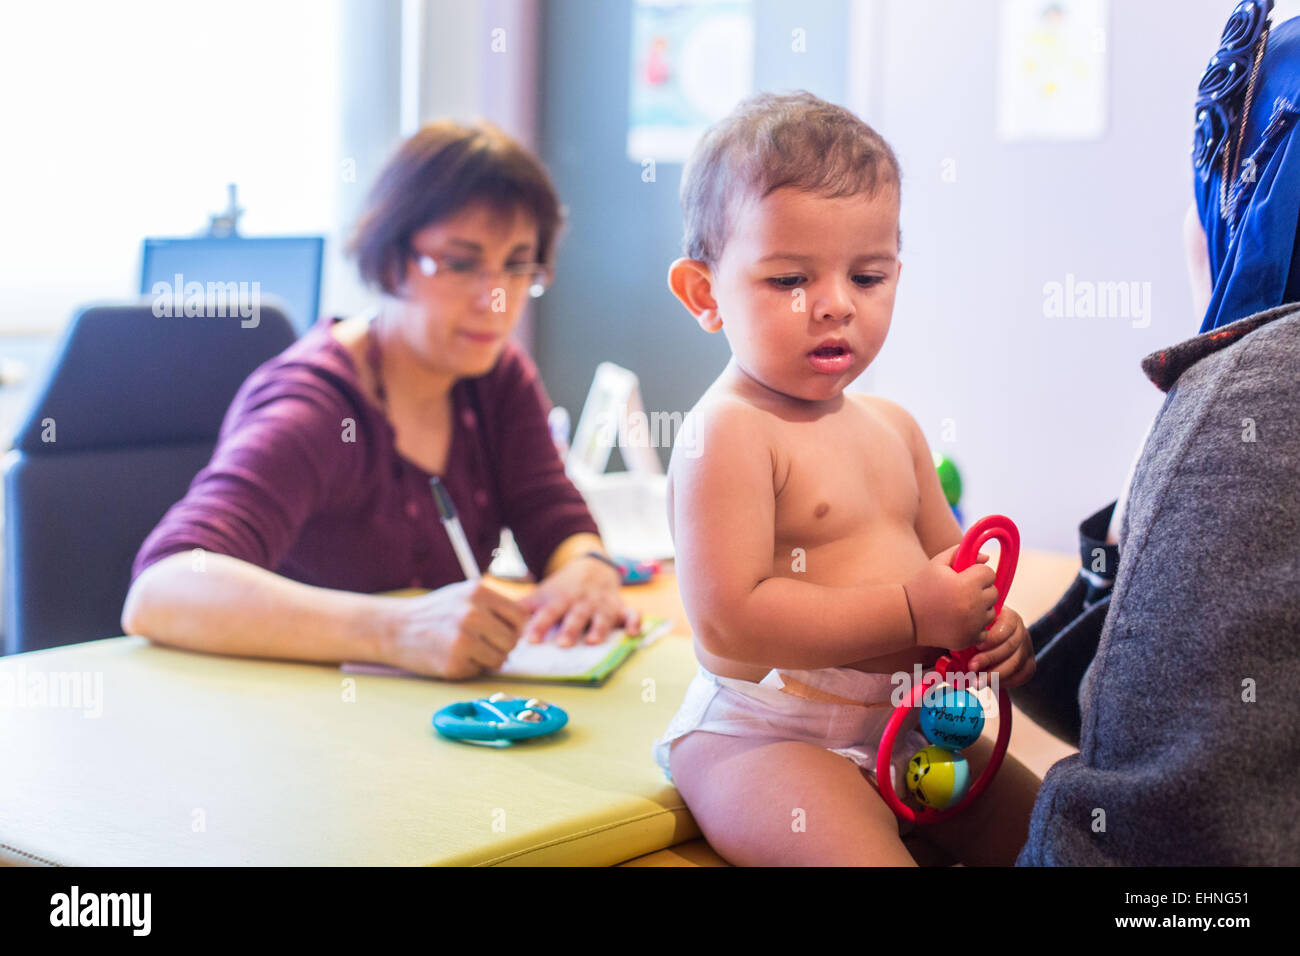 Doctor filling in a child health notebook, Maternal and Child Welfare, Charente, France. Stock Photo